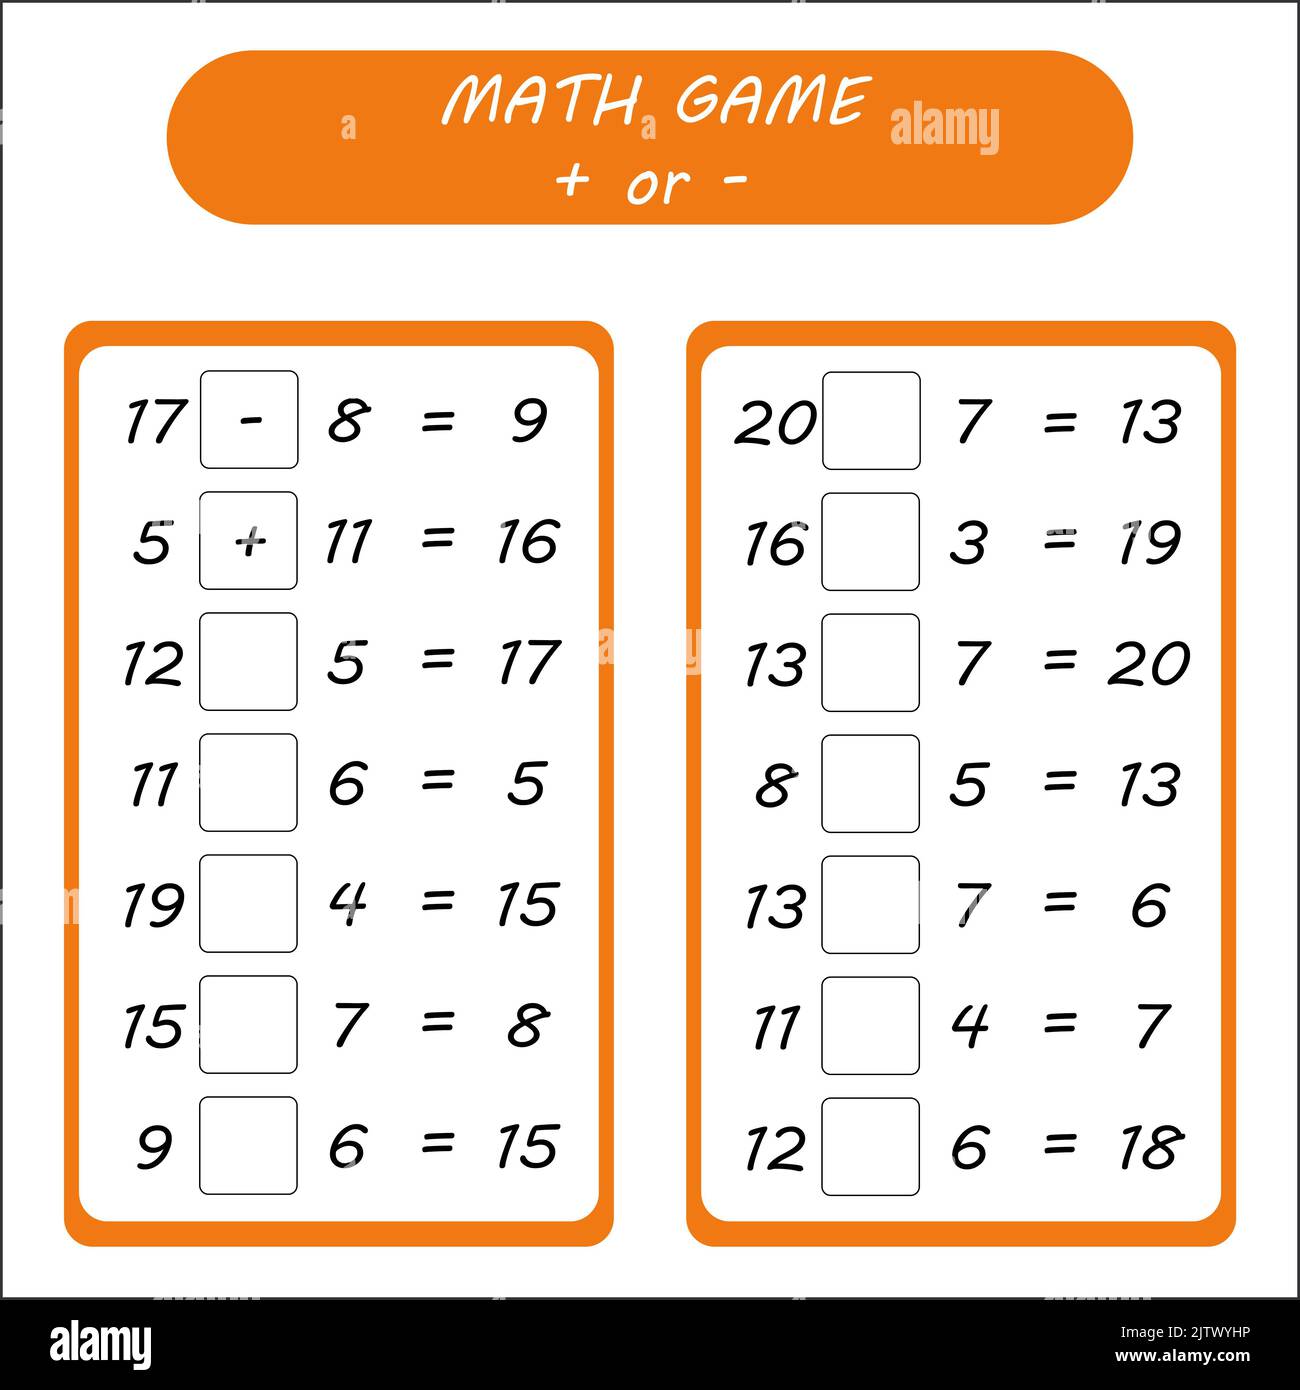 Math game. Plus or minus. Set worksheets for kids preschool and school age. Stock Photo